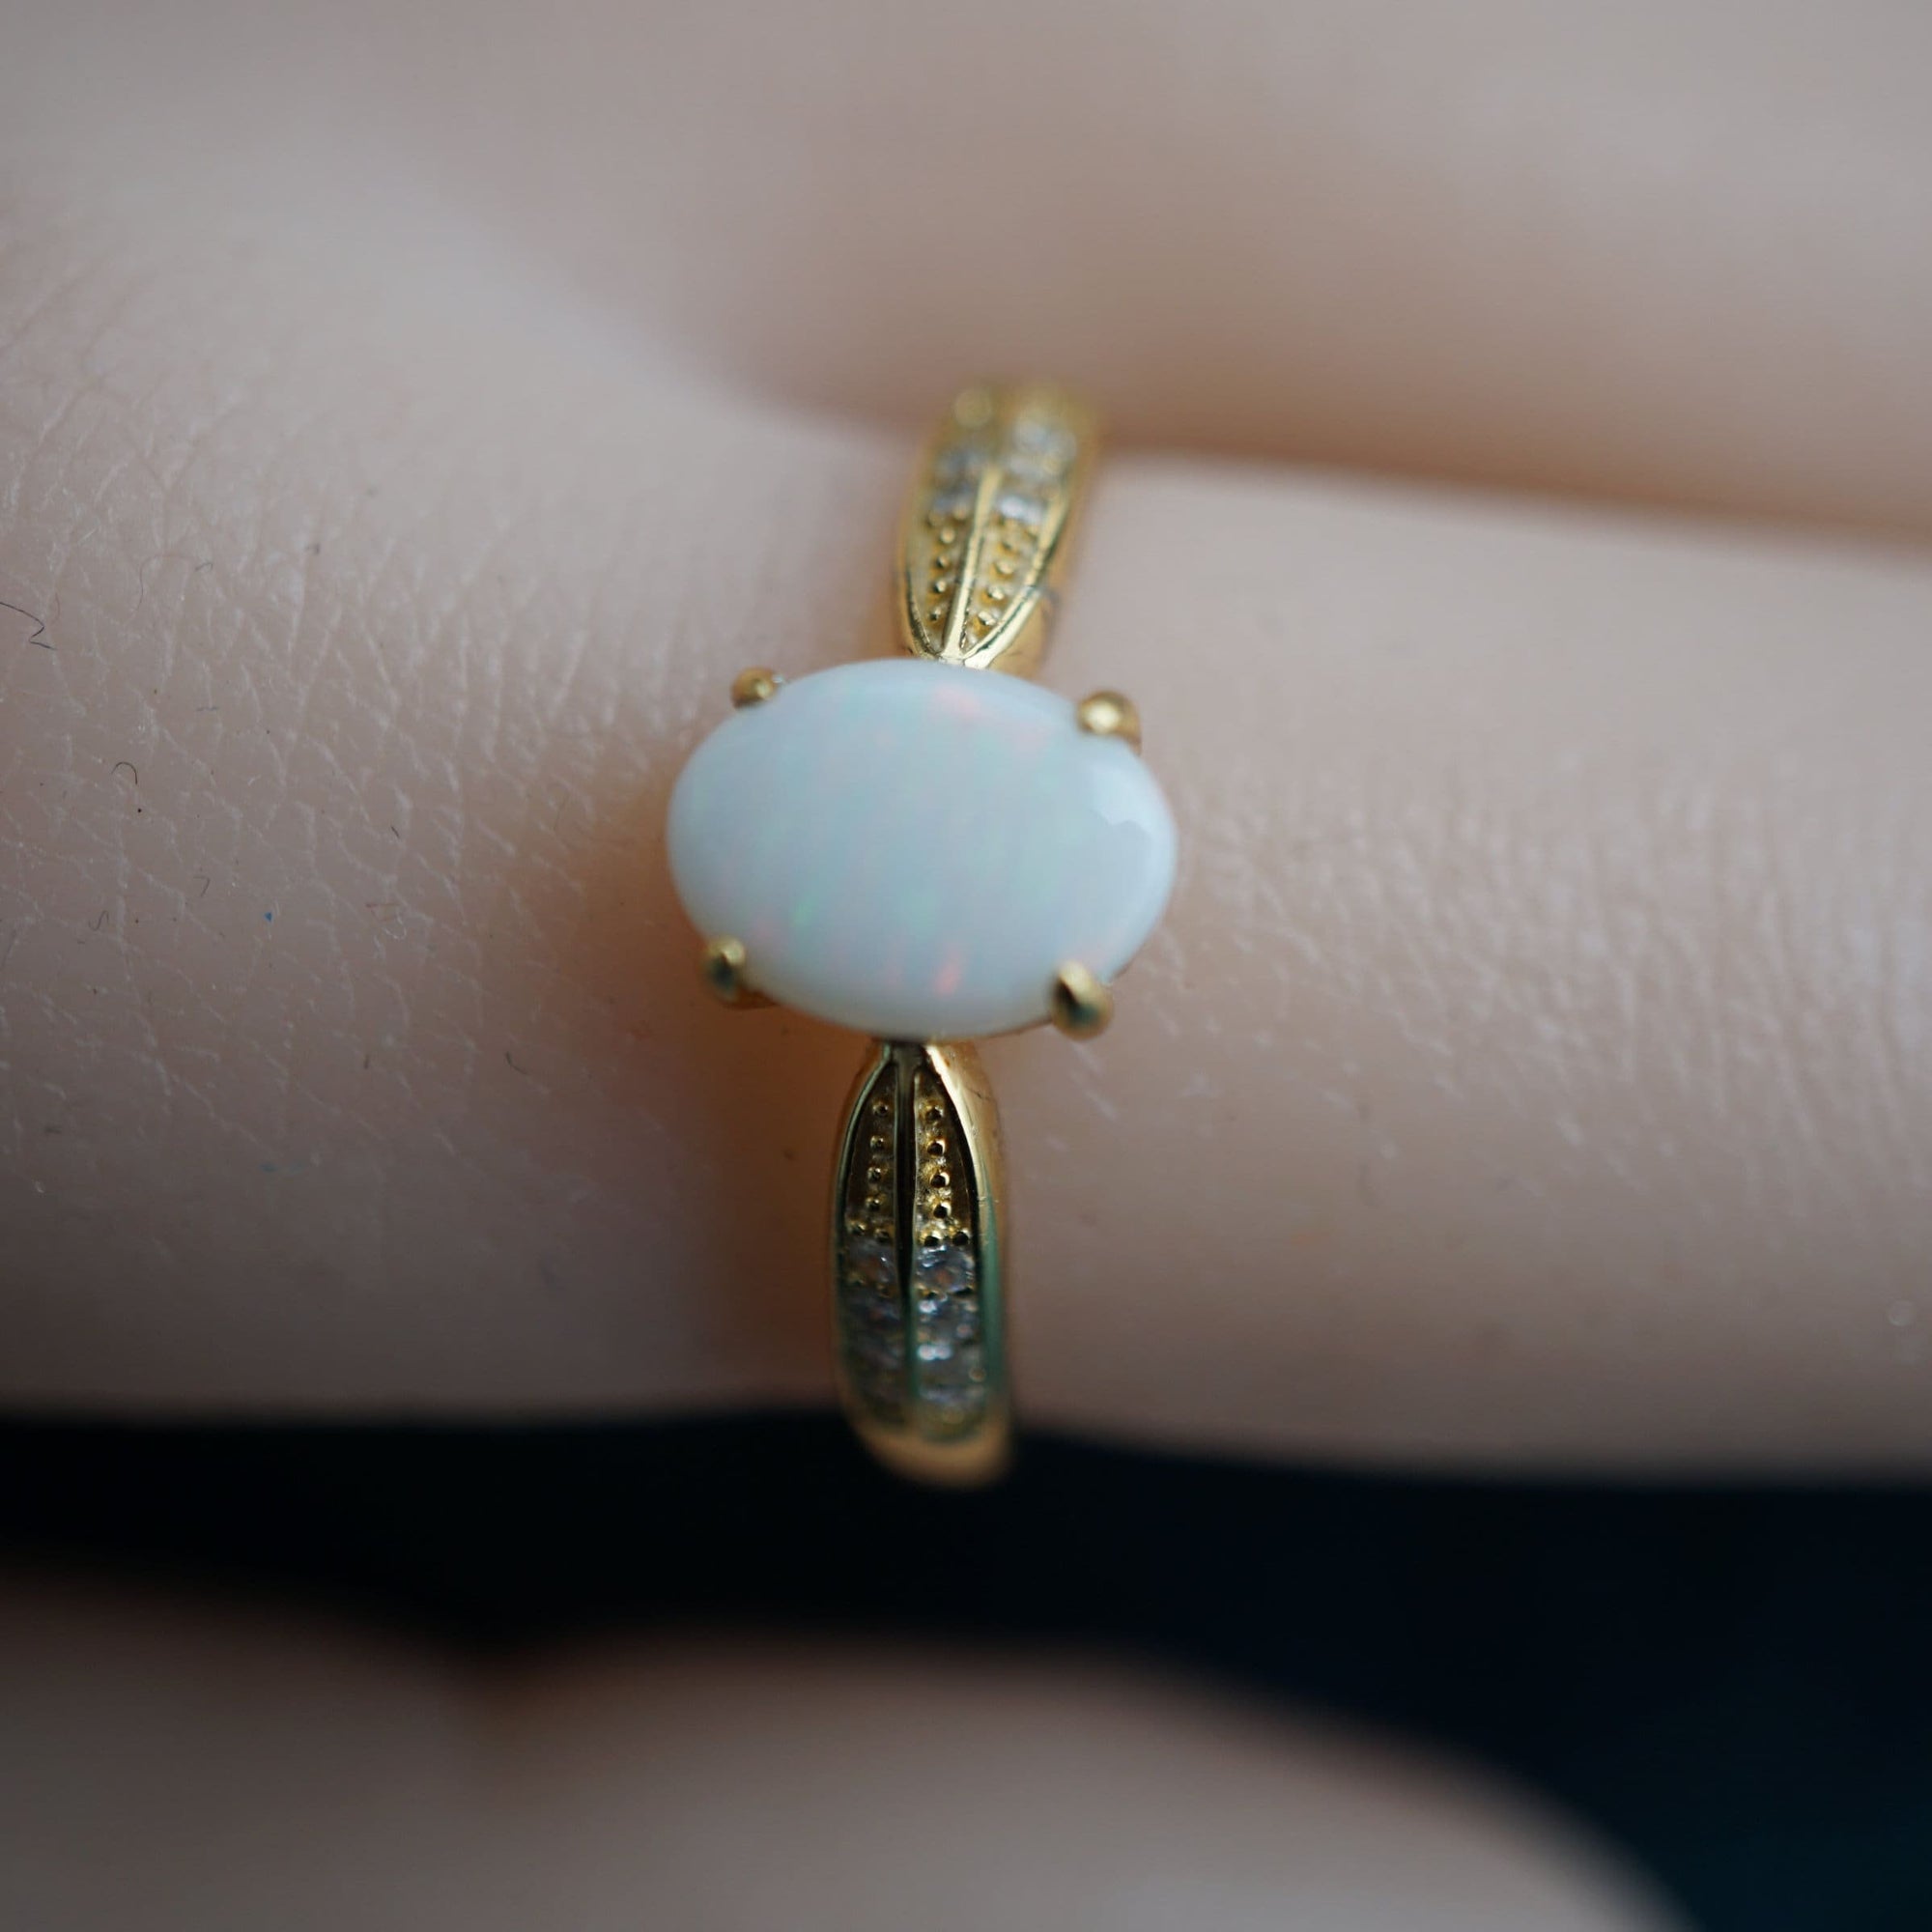 White Solid Real Australian Opal Ring In 18k Gold Vermeil Over 925 Sterling Silver, Opal Ring For Her Birthday, Opal Ring For Christmas-Vsabel Jewellery